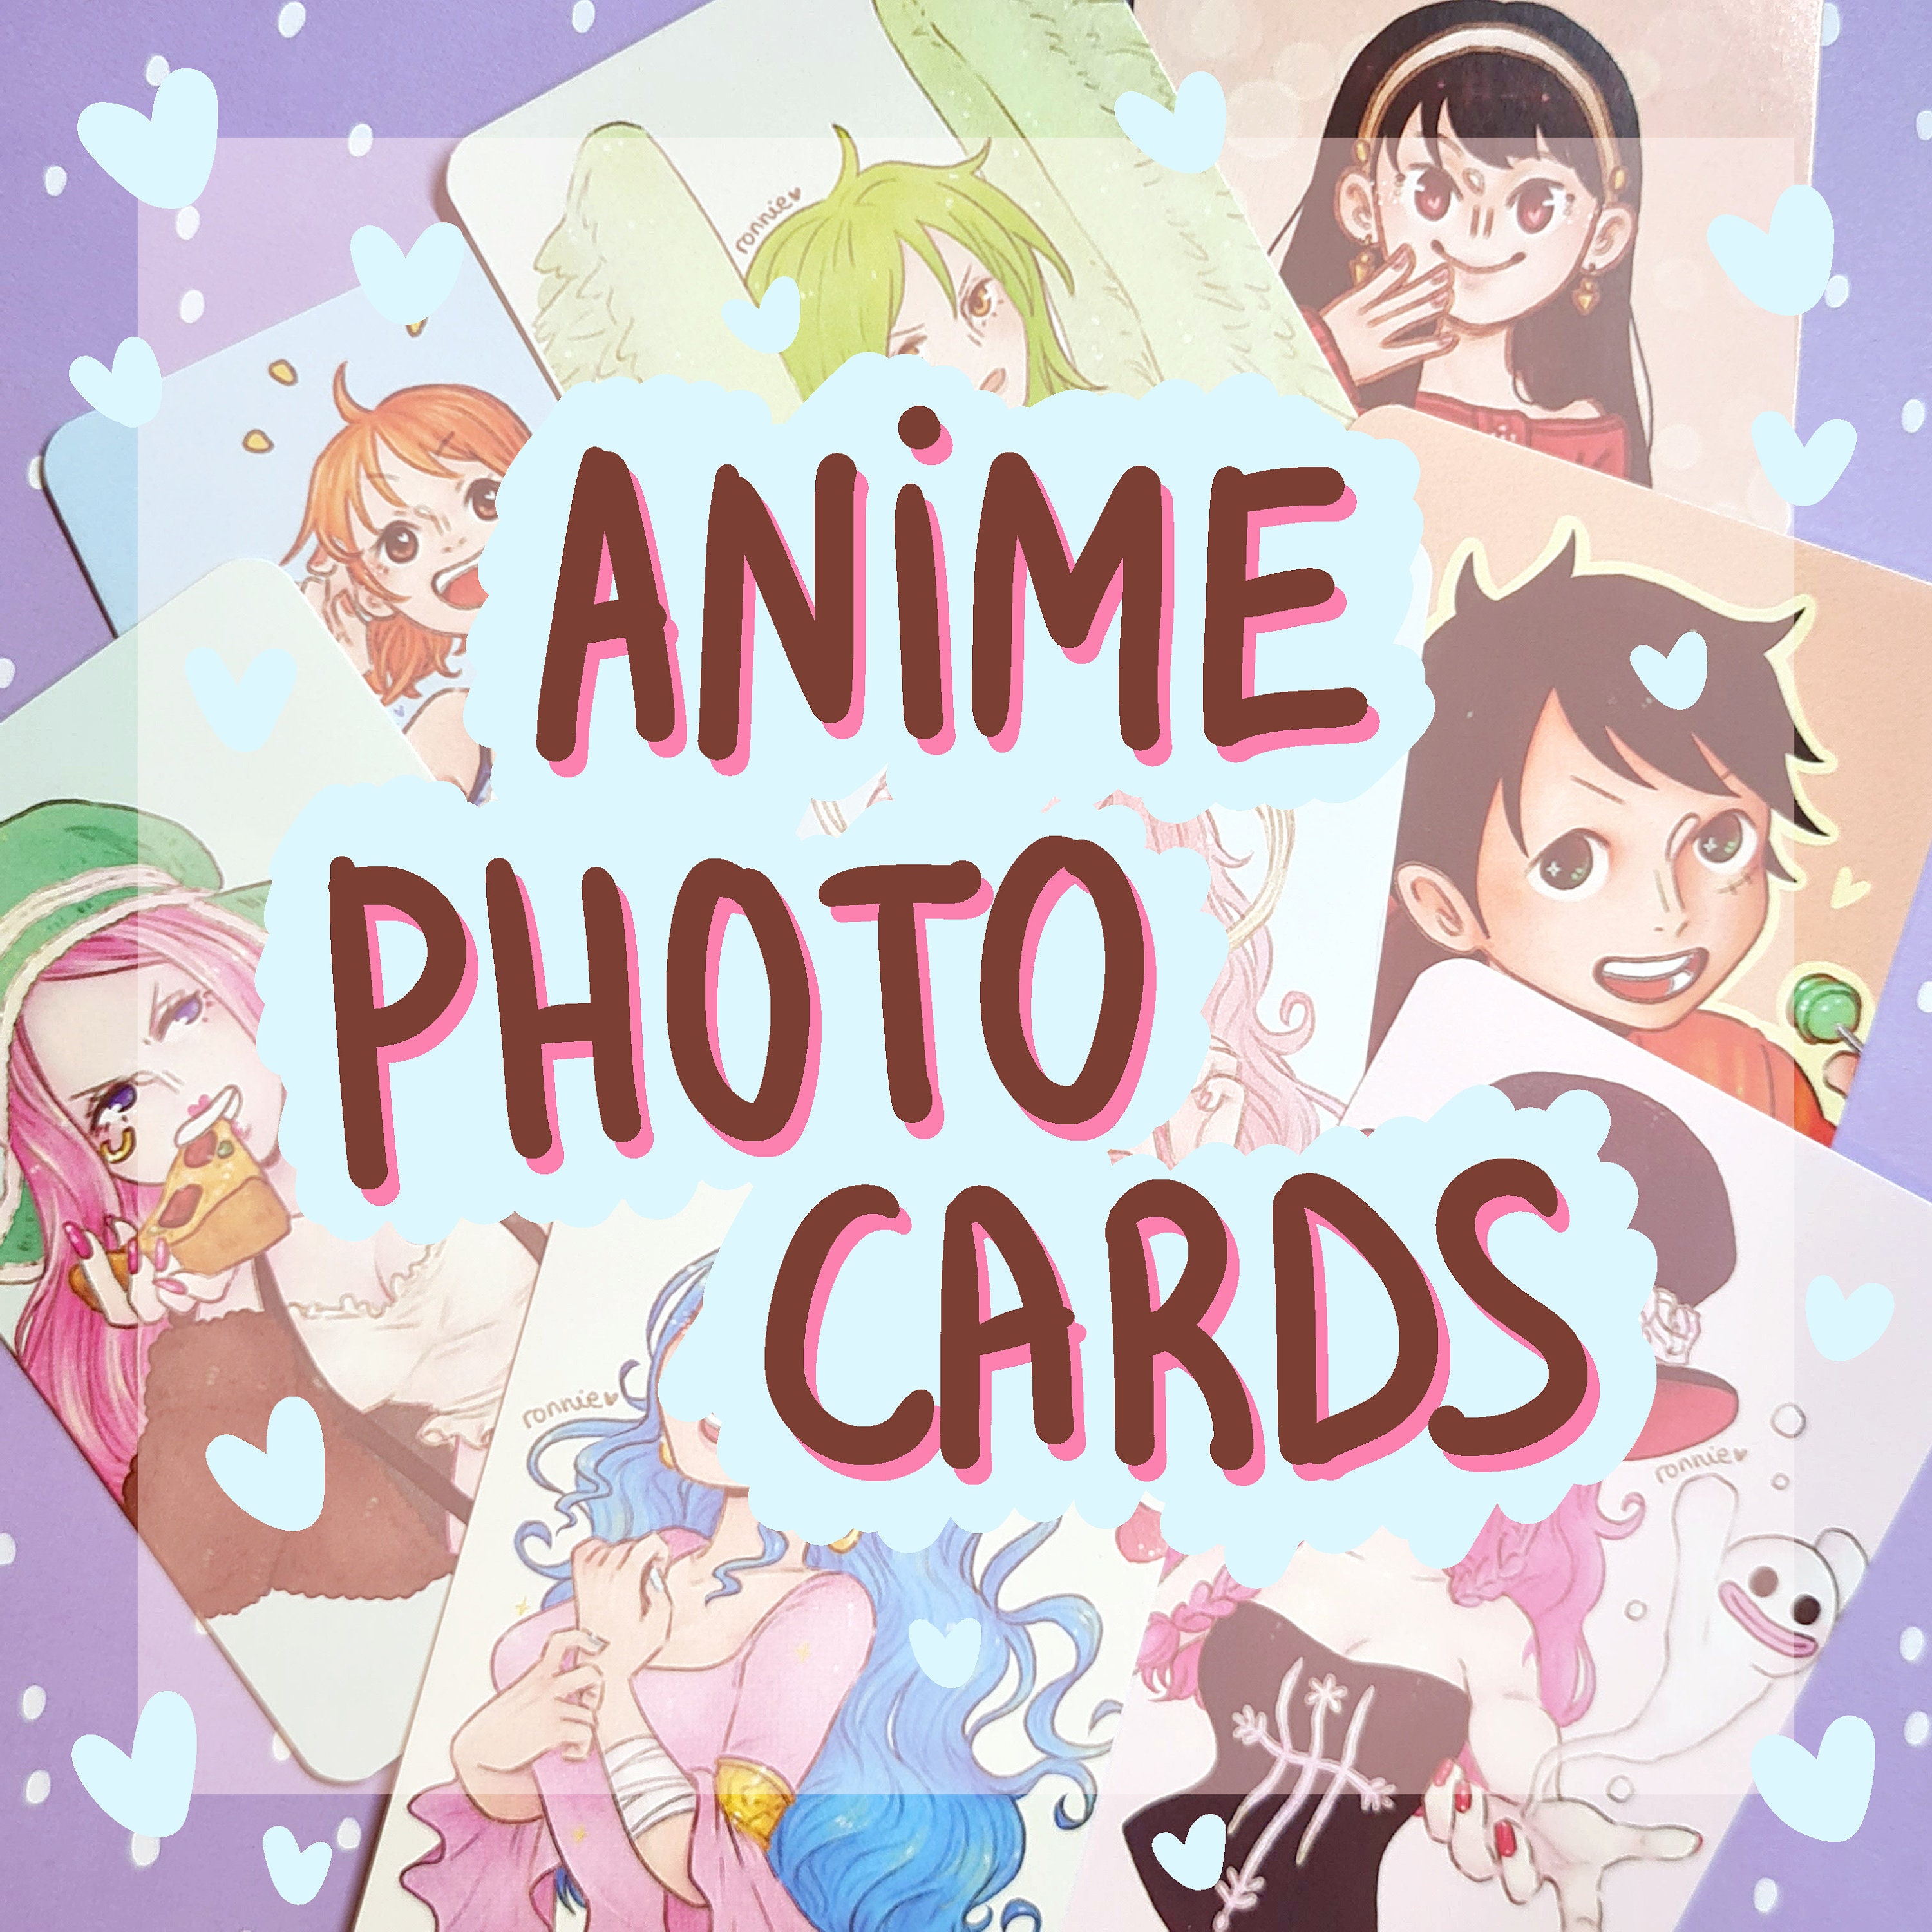 36/18 PC Vintage Aesthetic Anime Sticker/Post card - Artistworld's Ko-fi  Shop - Ko-fi ❤️ Where creators get support from fans through donations,  memberships, shop sales and more! The original 'Buy Me a